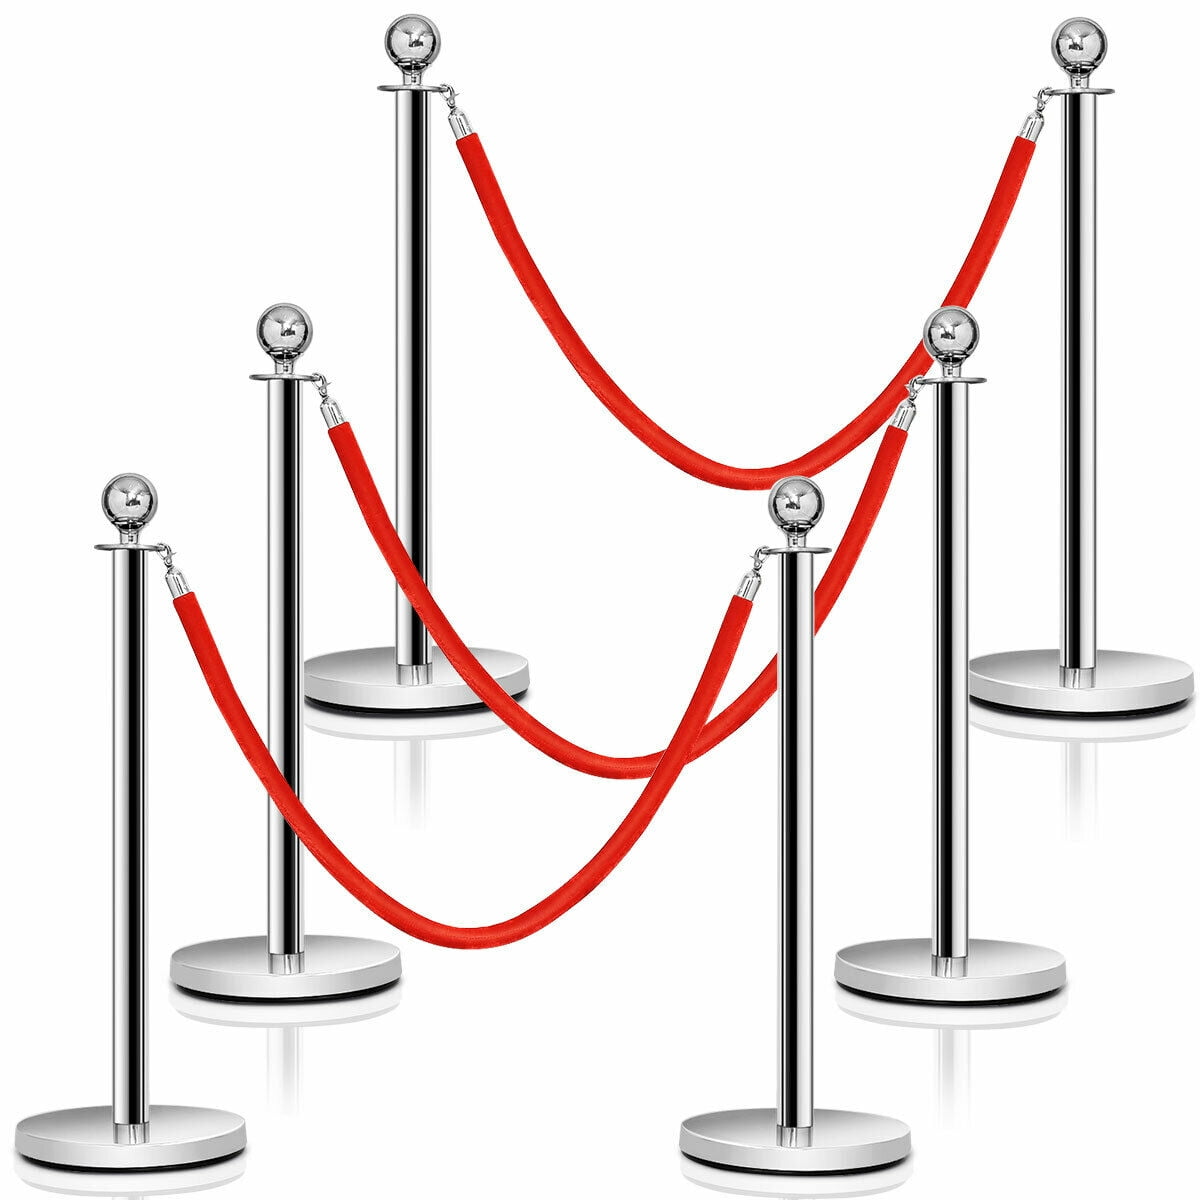 8 Stanchion Rope with Silver Ends for Rope Style Crowd Control/Guidance Stanchion Crowd Control Stanchion Queue Black 